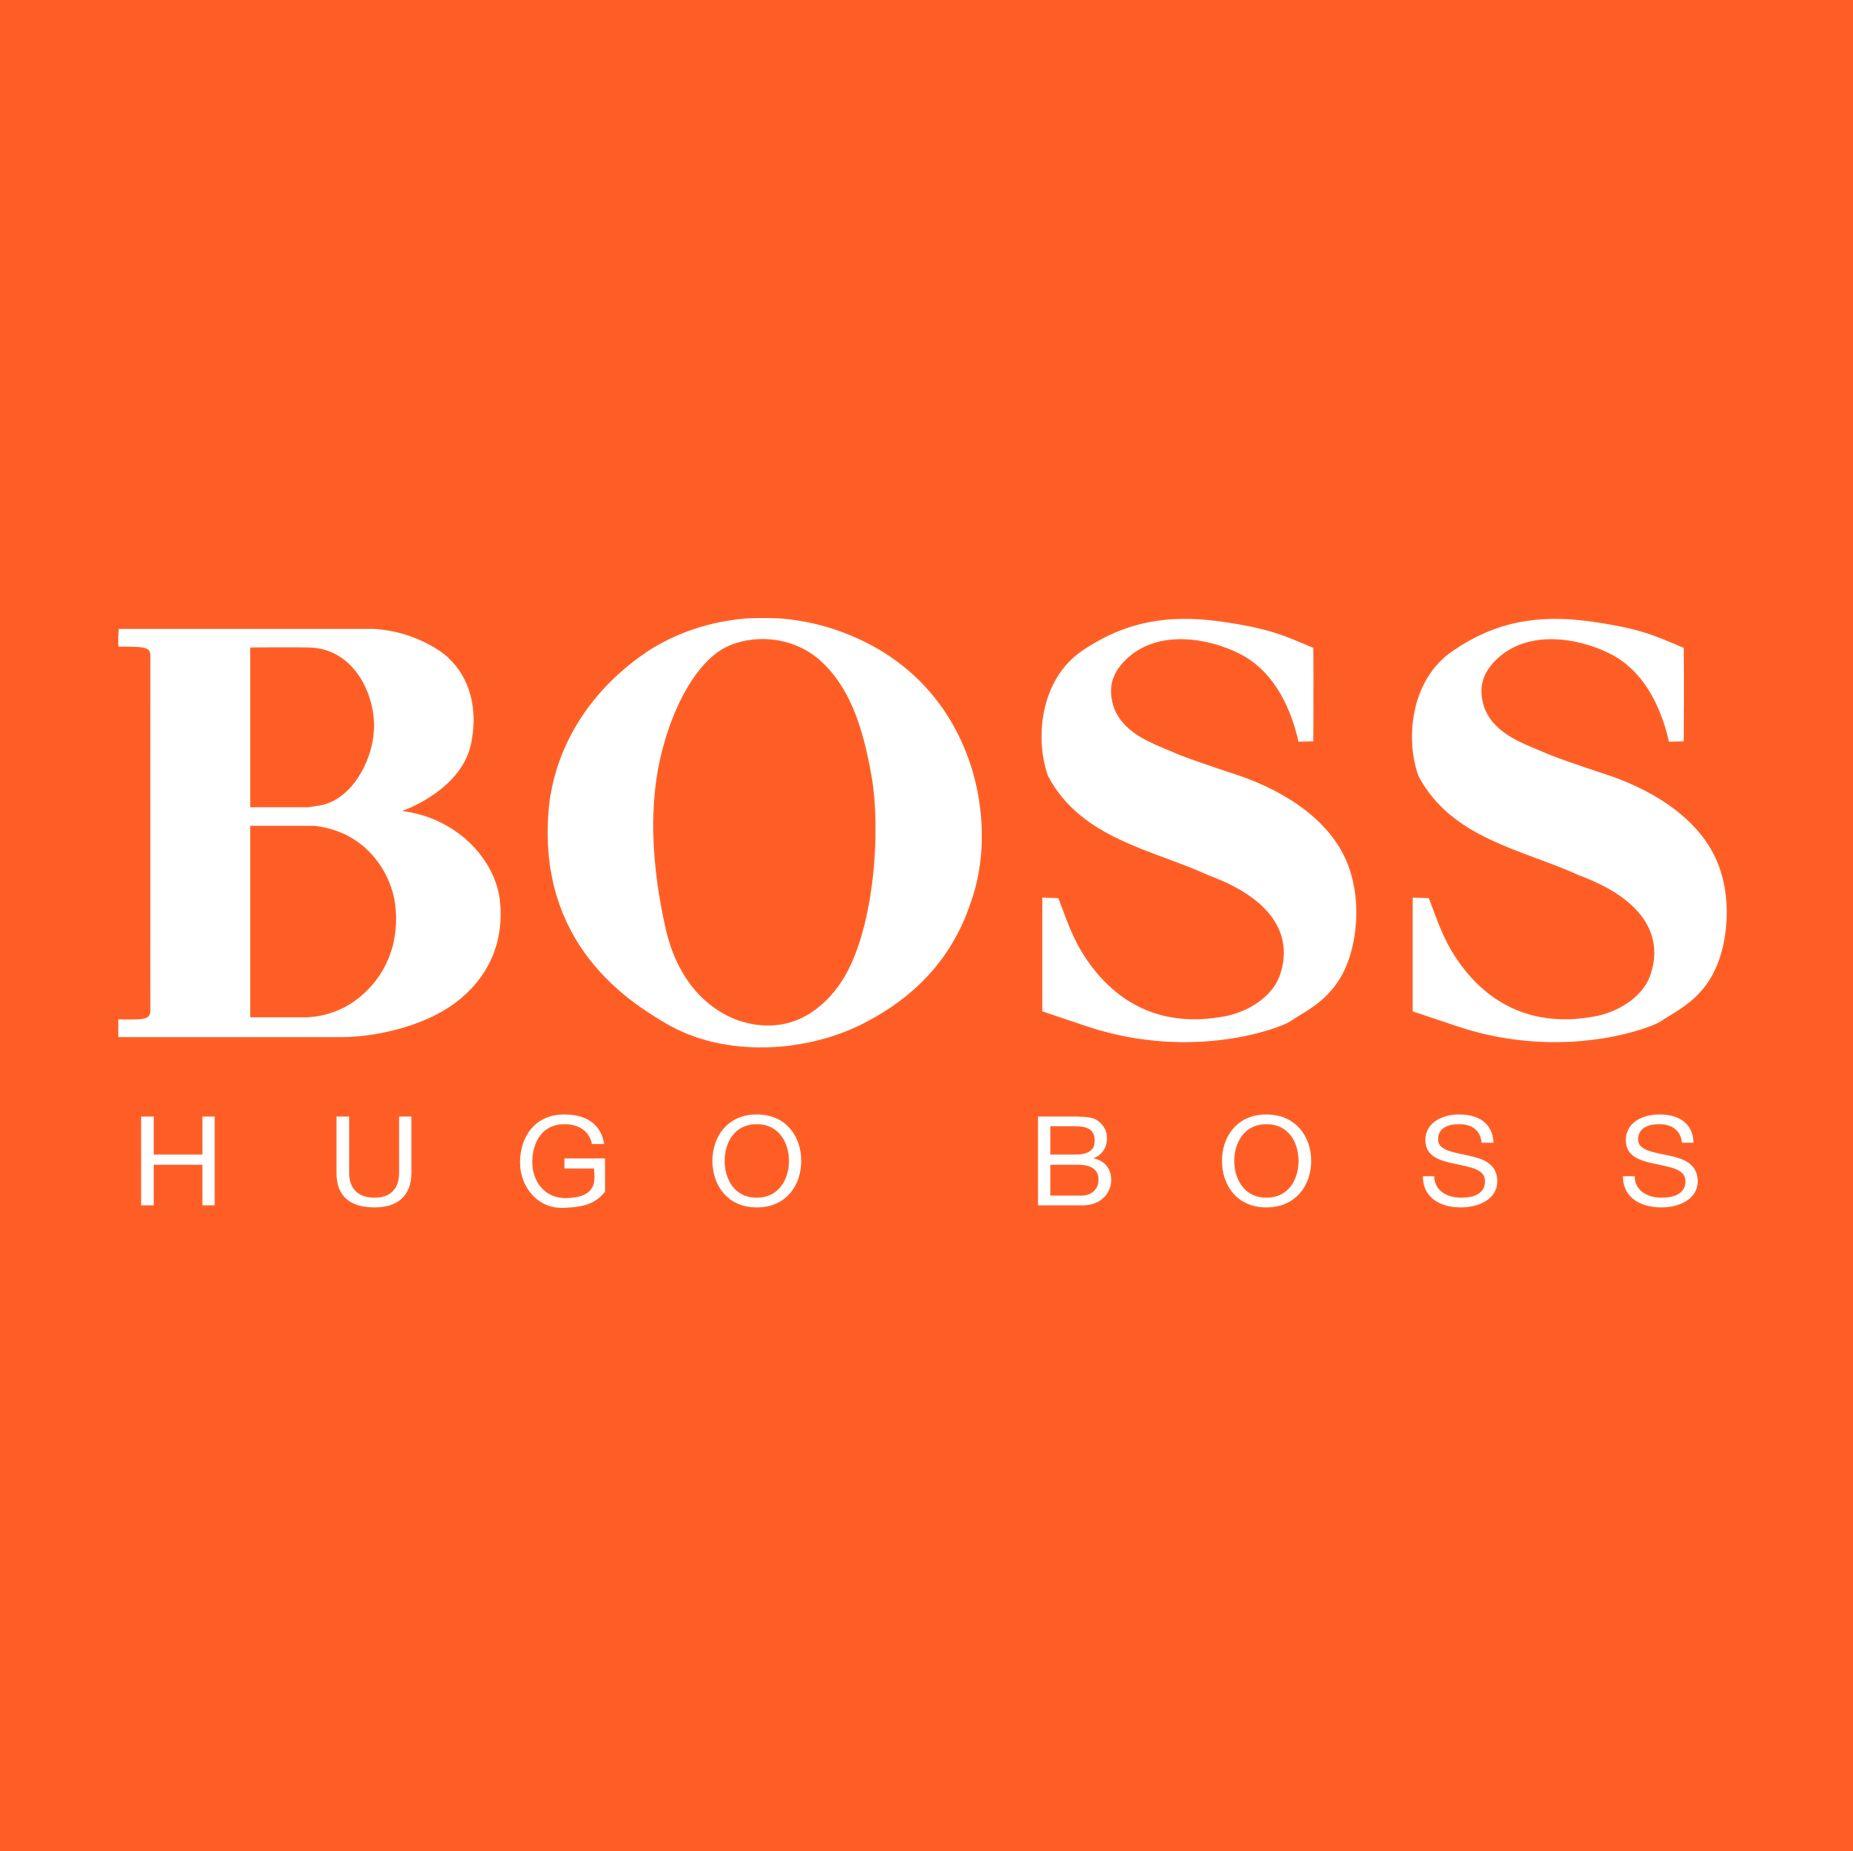 Hugo Boss Logo - Hugo Boss Logo, Hugo Boss Symbol Meaning, History and Evolution